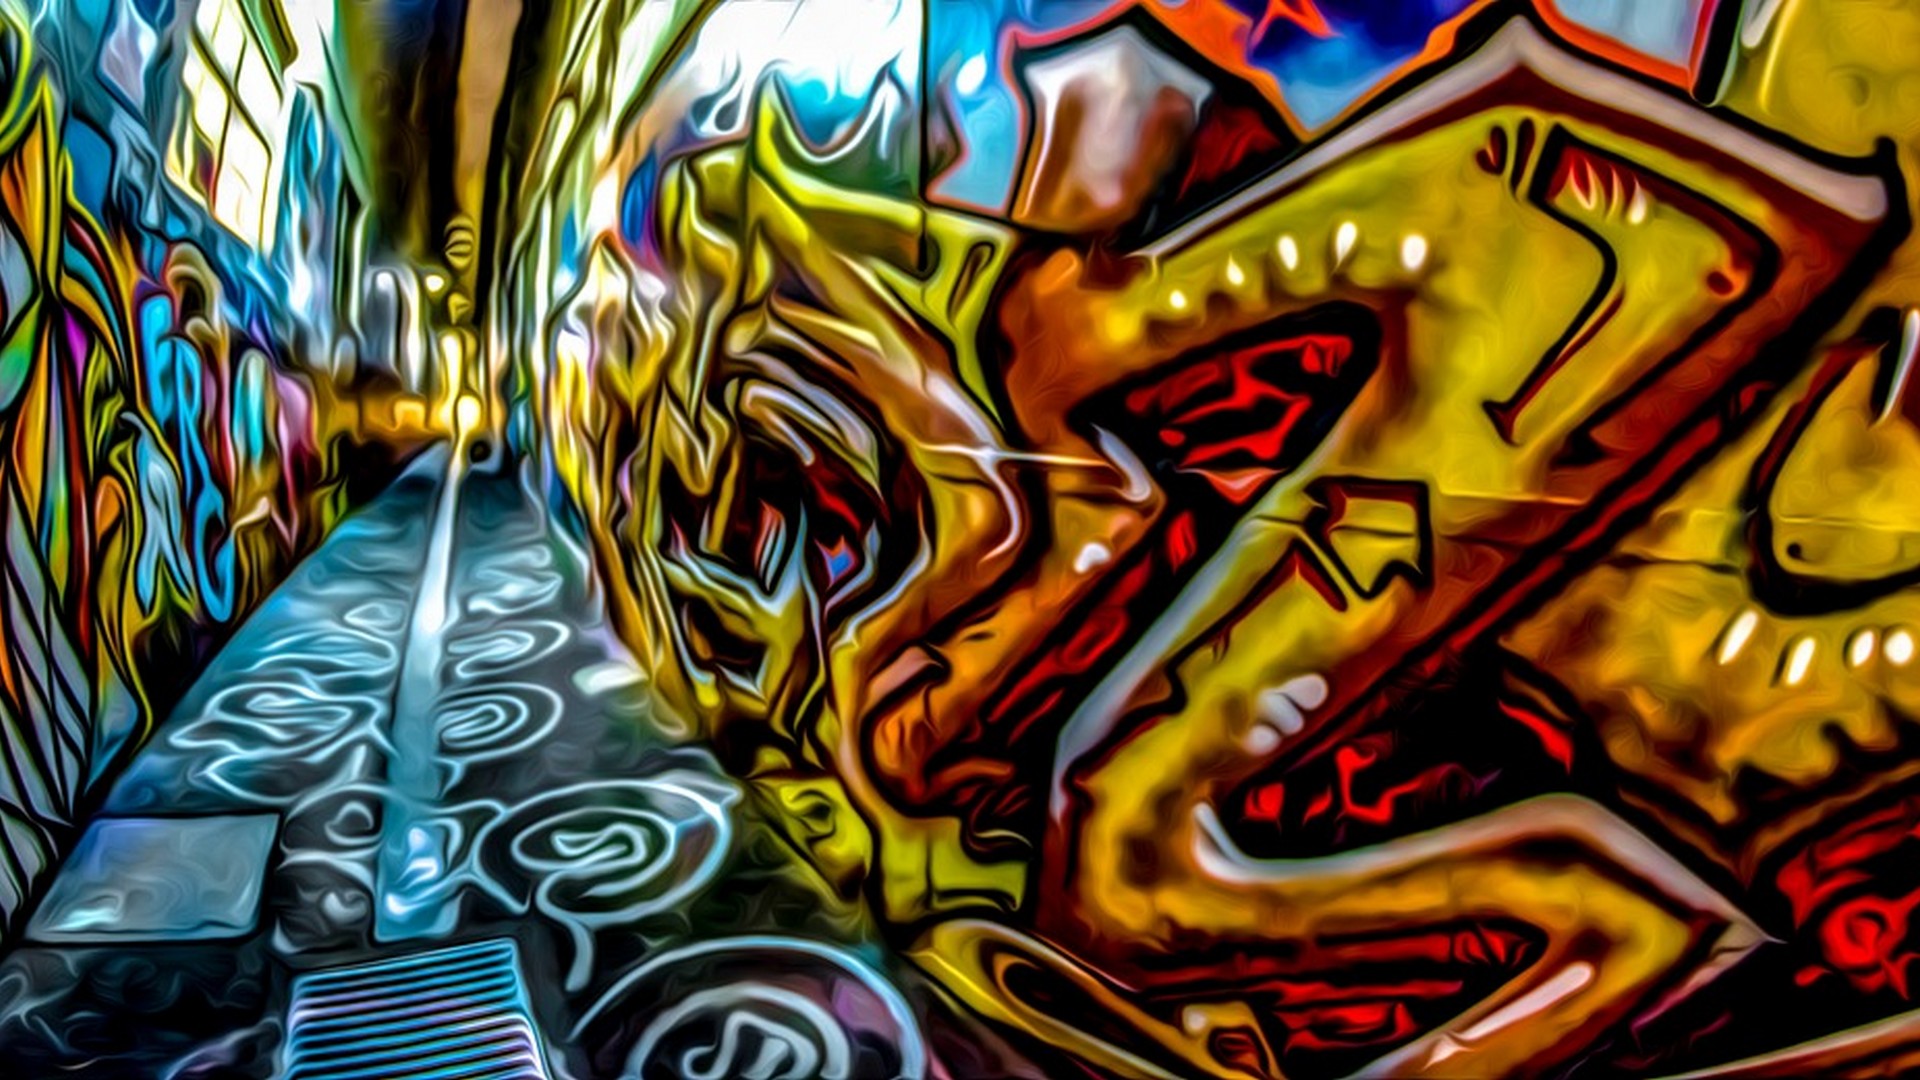 Graffiti Characters Desktop Backgrounds with image resolution 1920x1080 pixel. You can make this wallpaper for your Desktop Computer Backgrounds, Mac Wallpapers, Android Lock screen or iPhone Screensavers